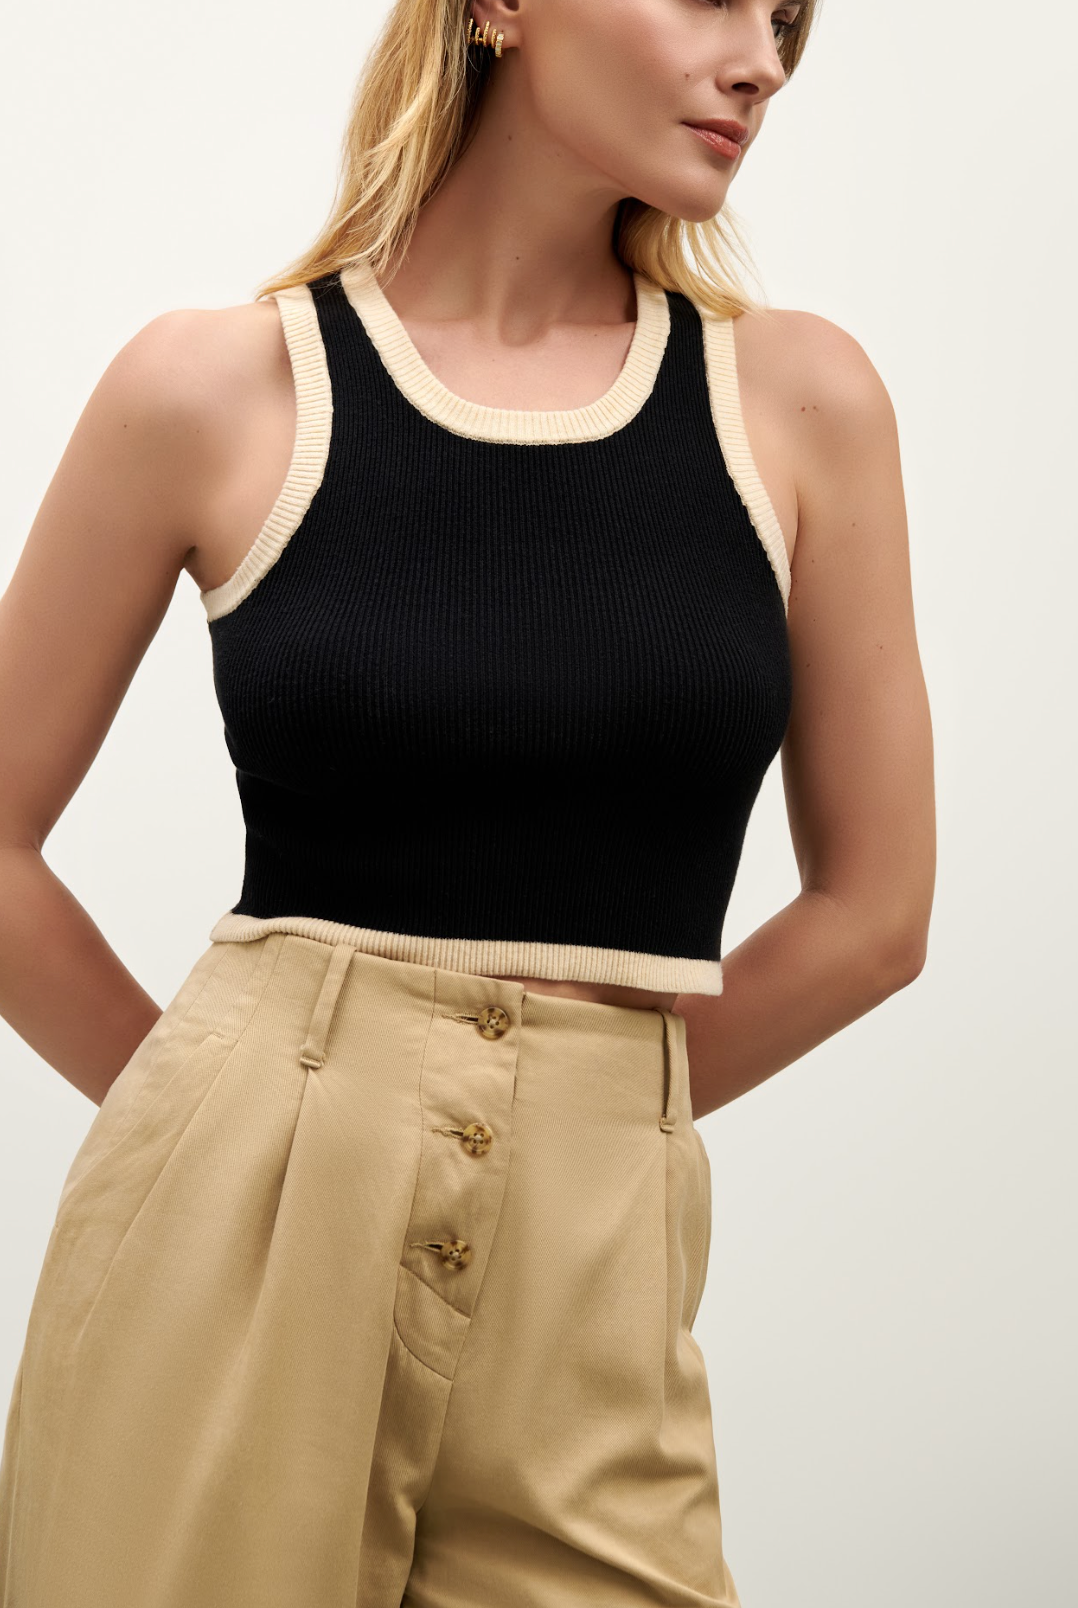 The Izzy Contrast Tank Top - Black & Oatmeal